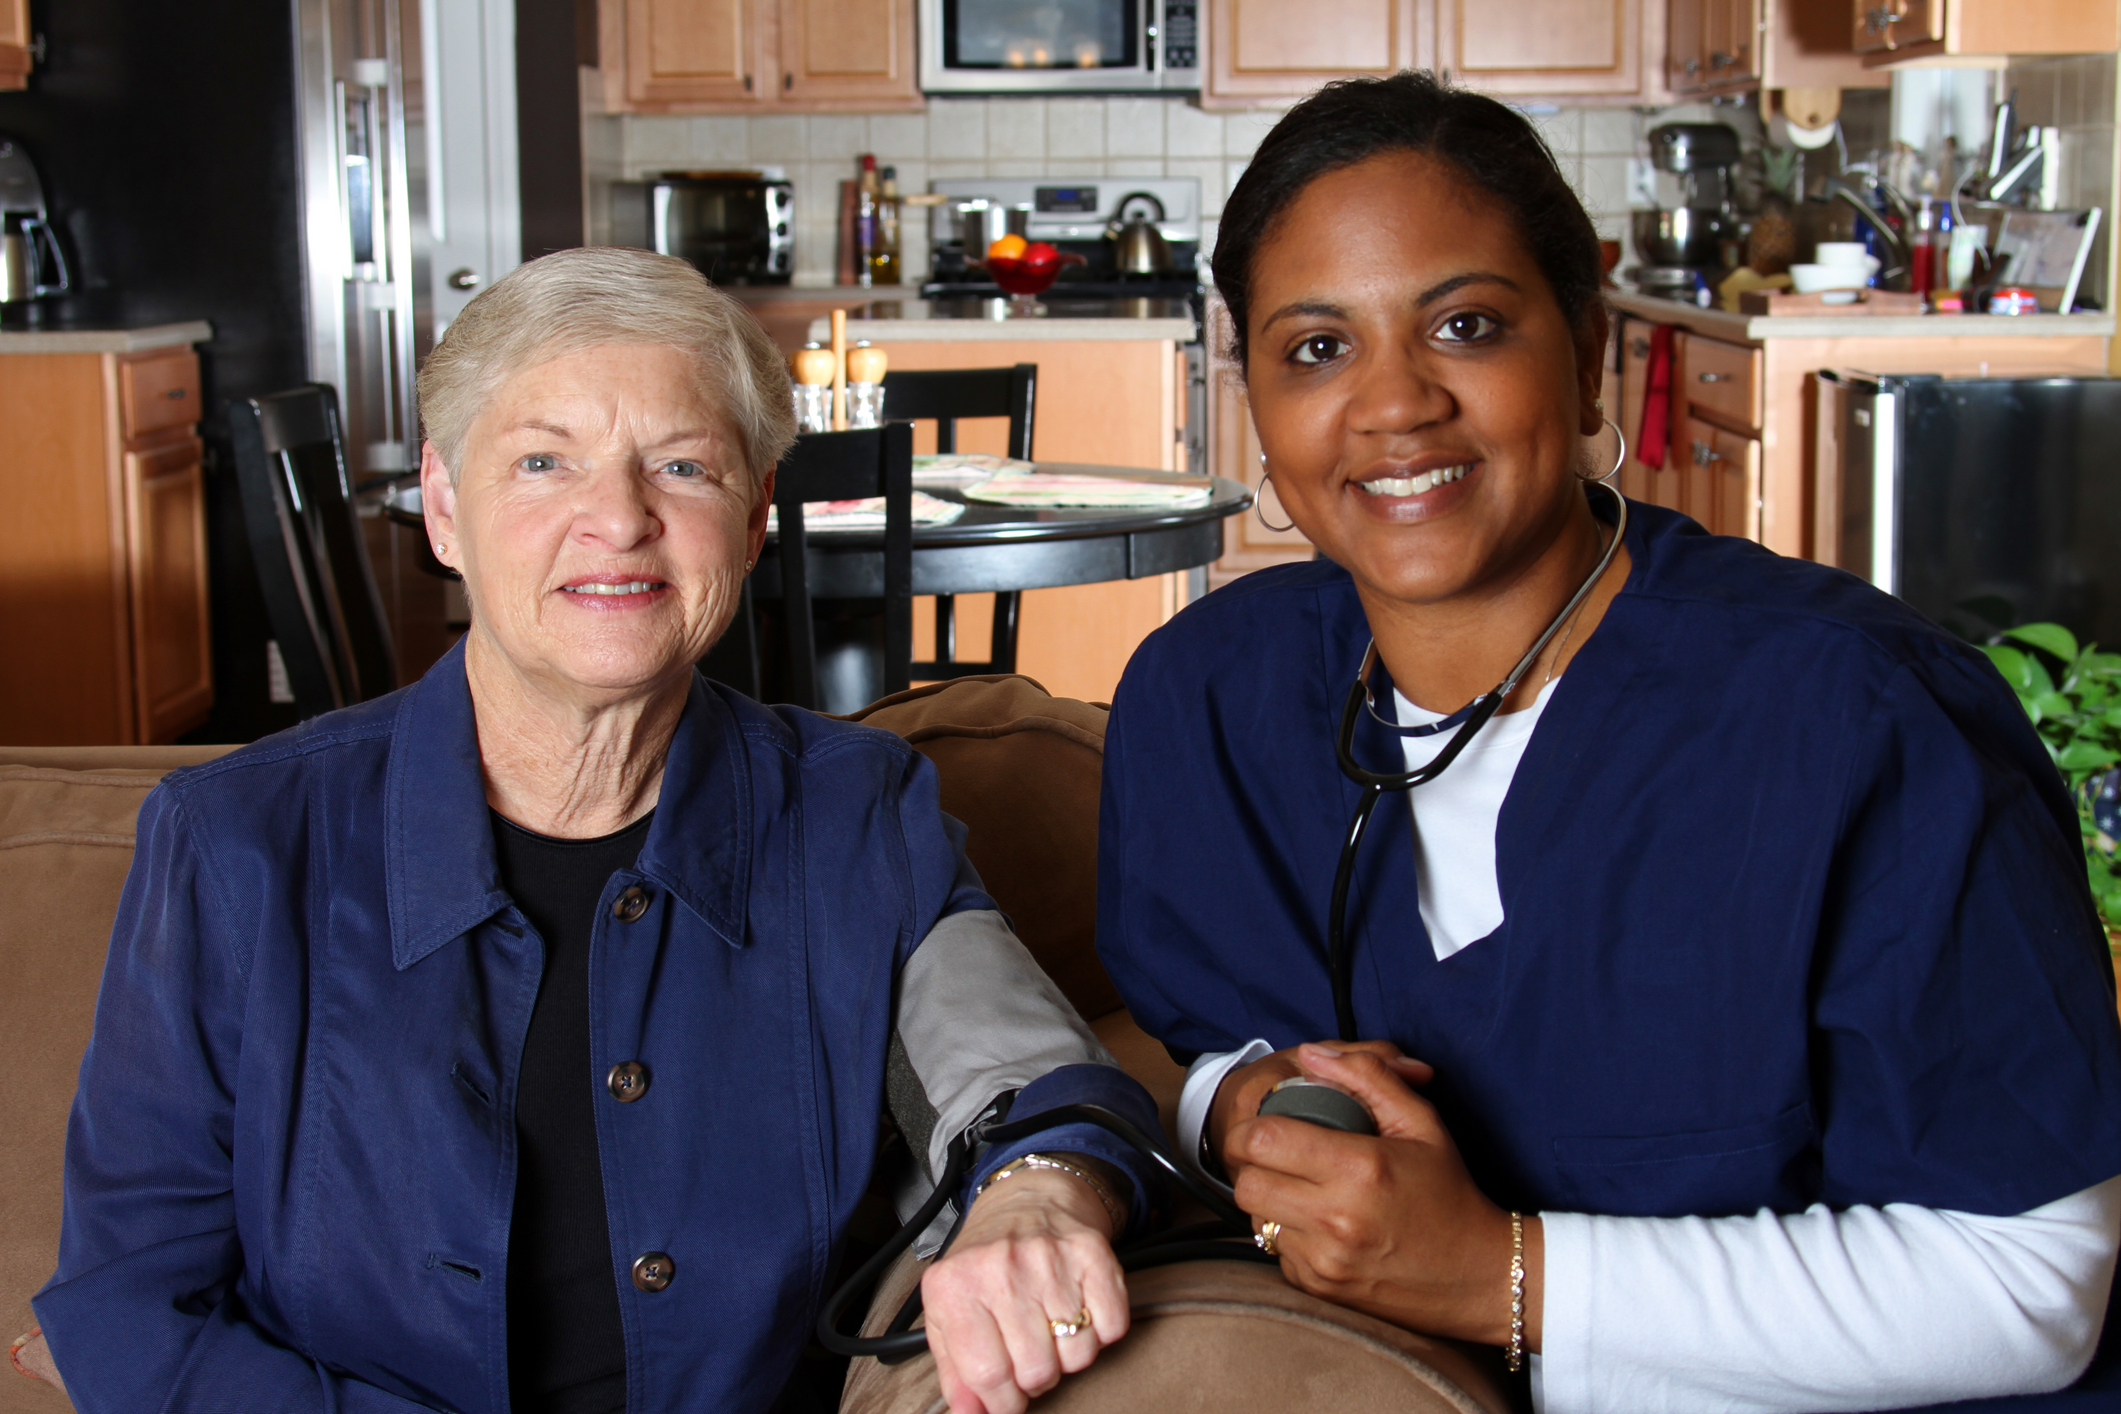 Home health care worker and an elderly woman